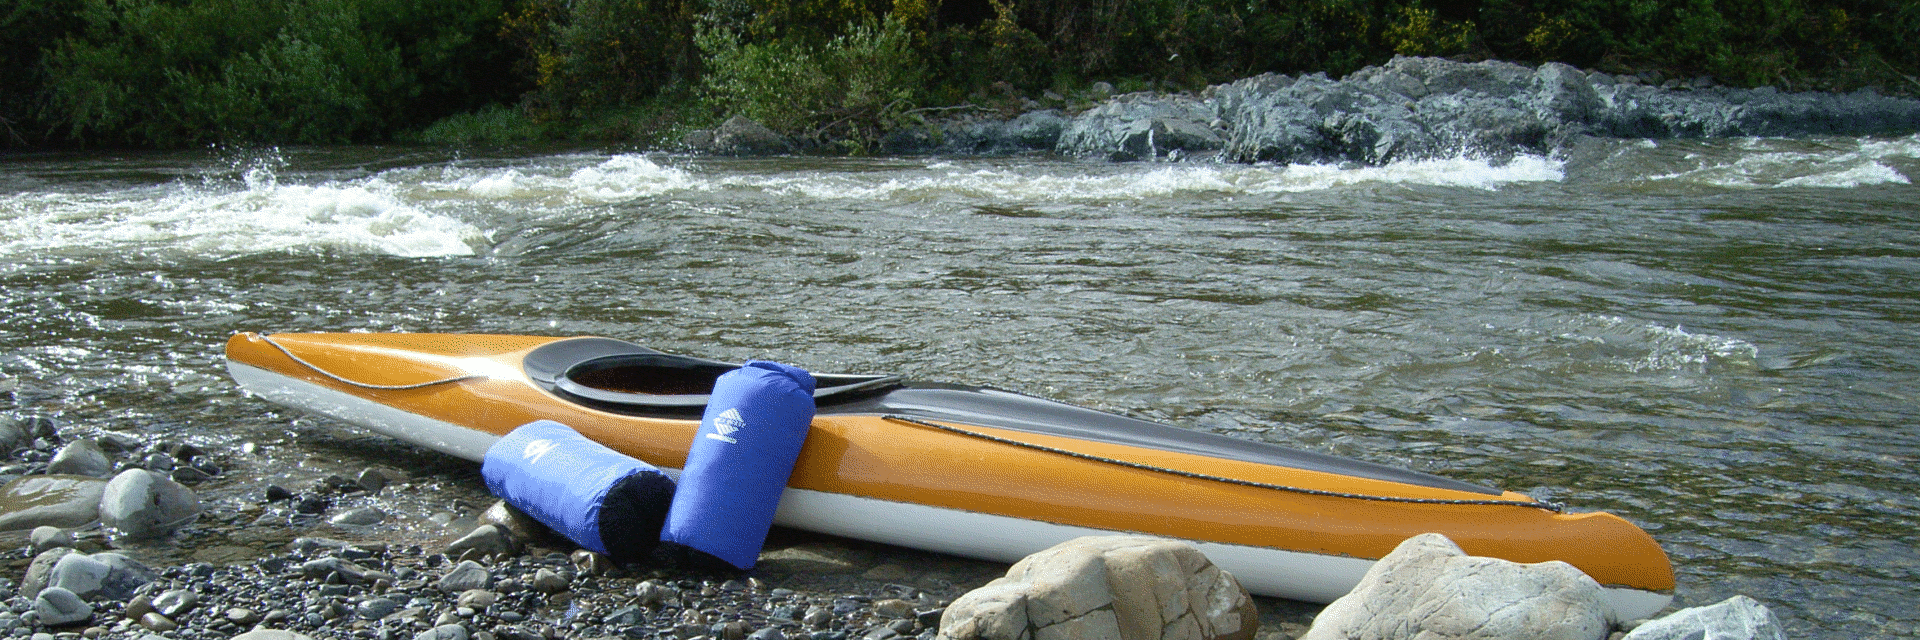 activa rolltop dry bags with kayak near river